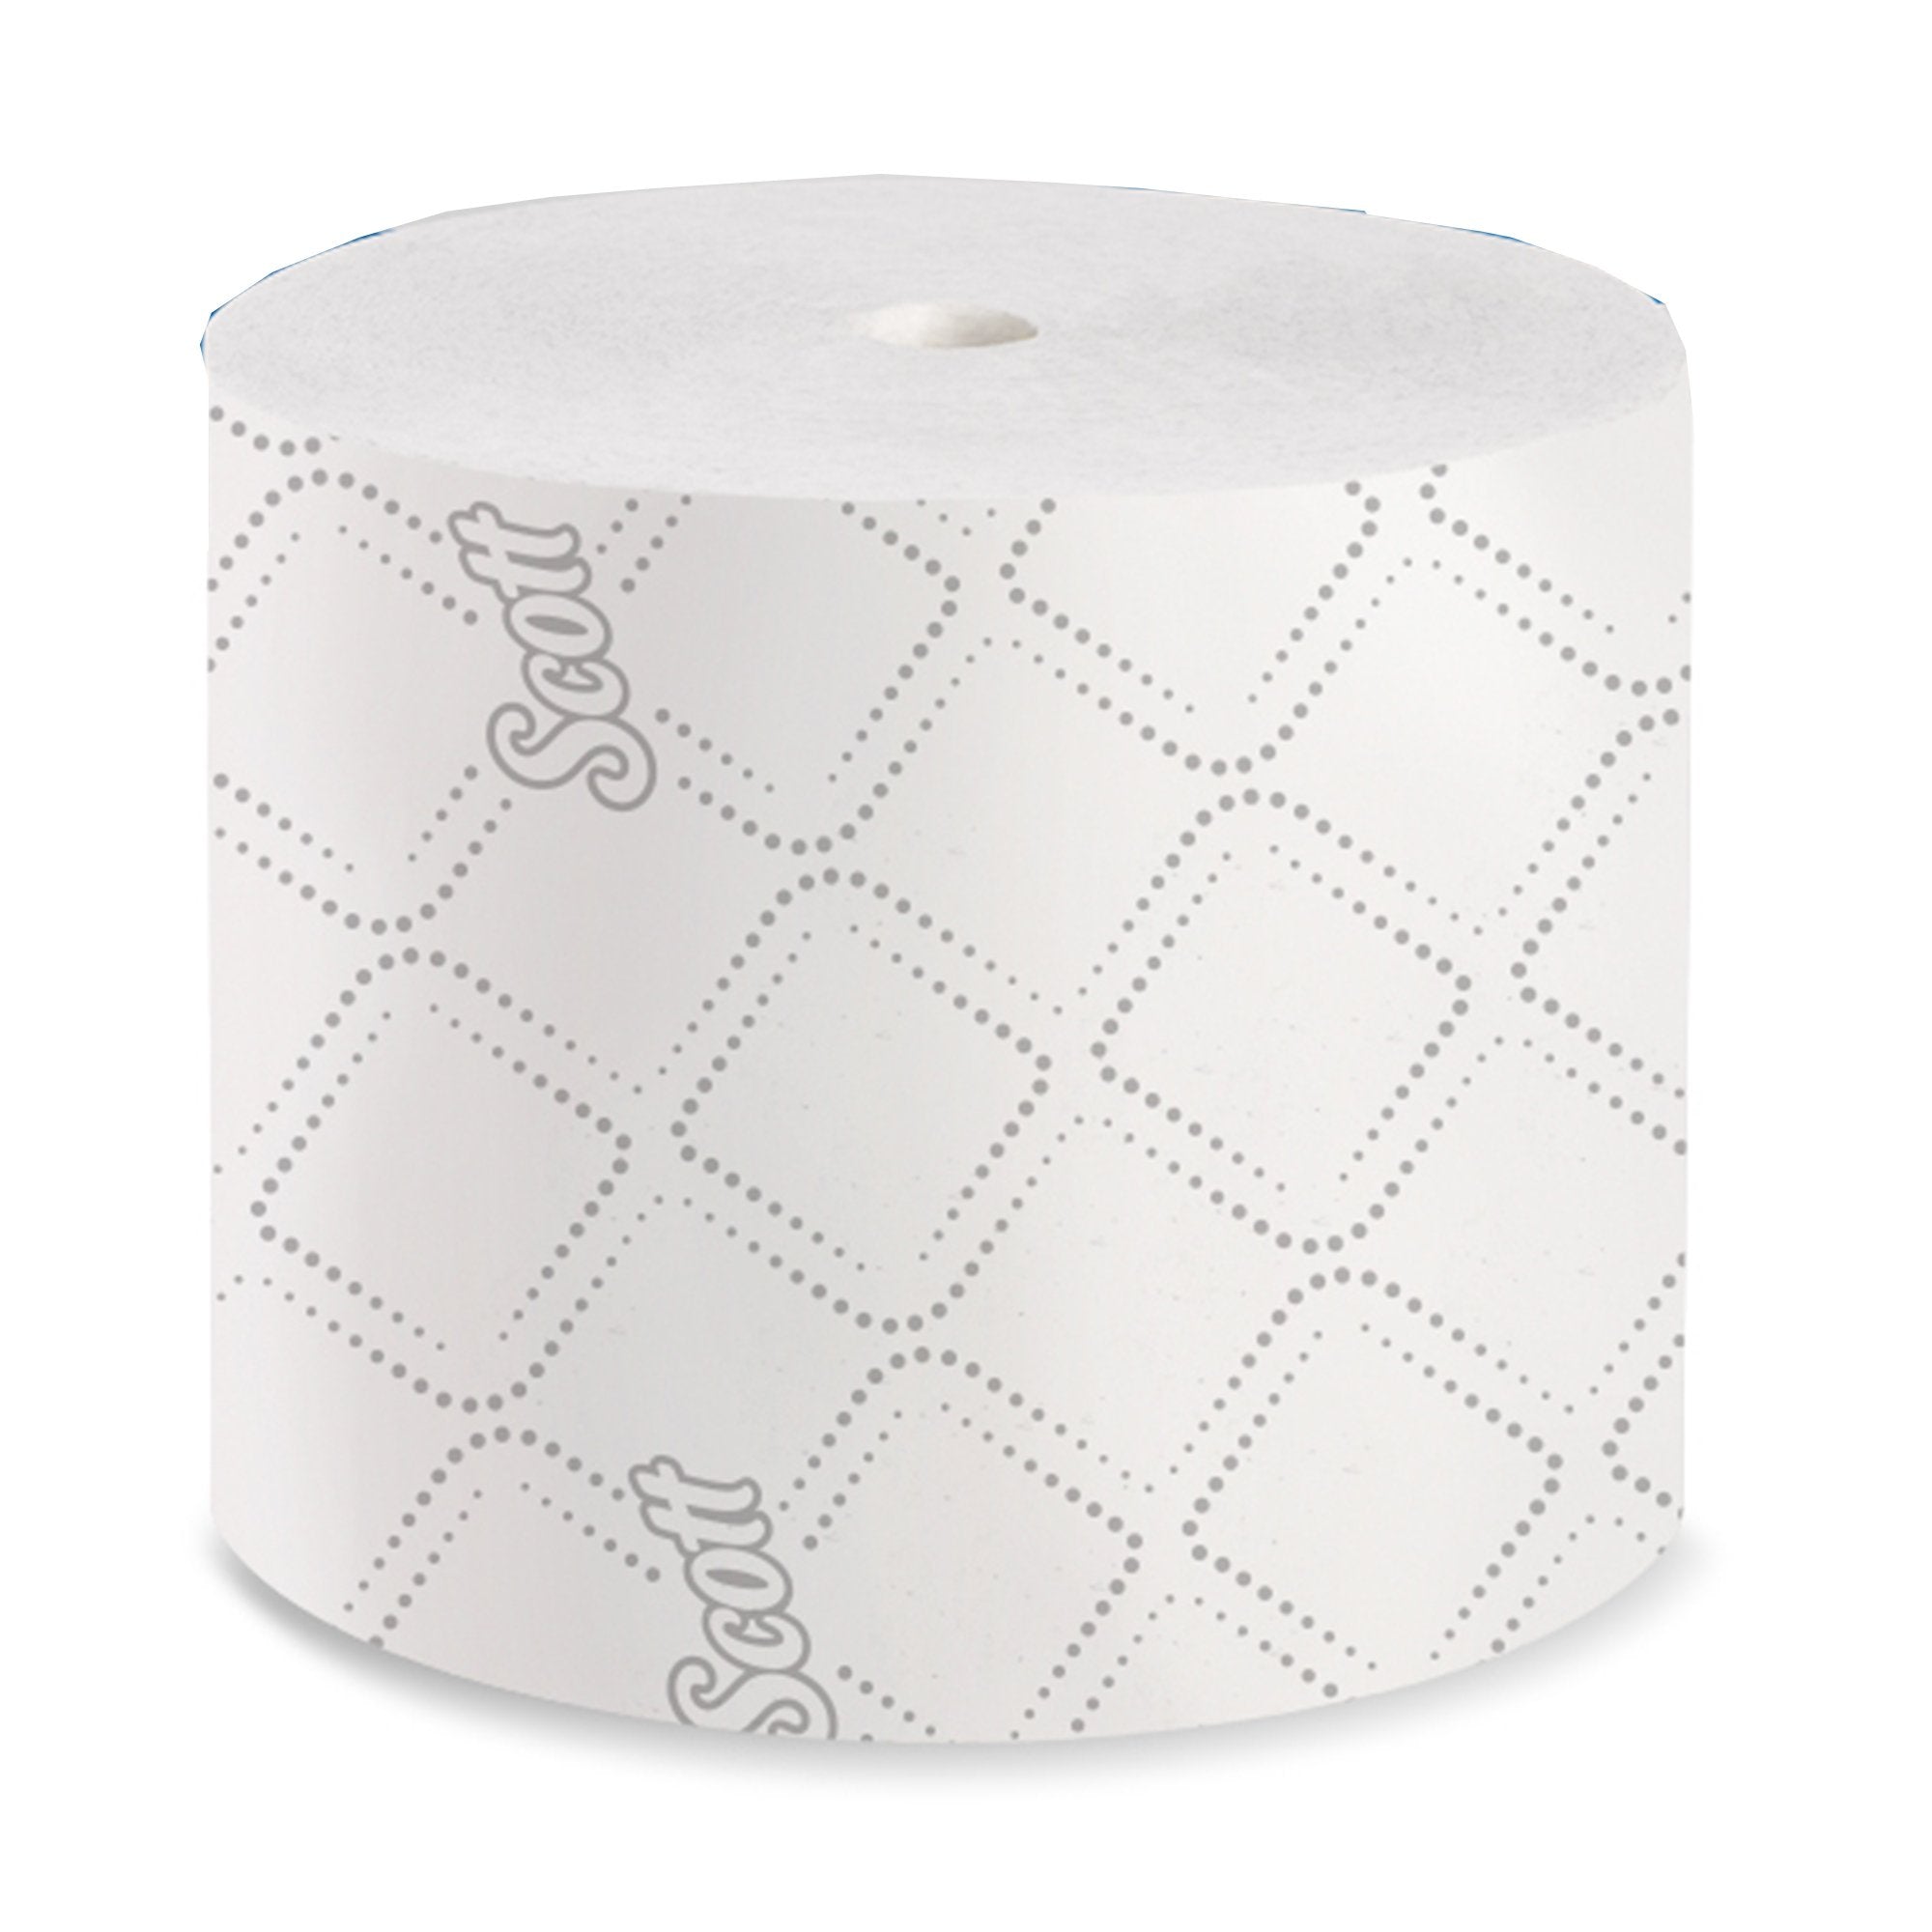 Toilet Tissue Scott® Pro White 2-Ply Standard Size Cored Roll 1100 Sheets 3-7/10 X 3-9/10 Inch